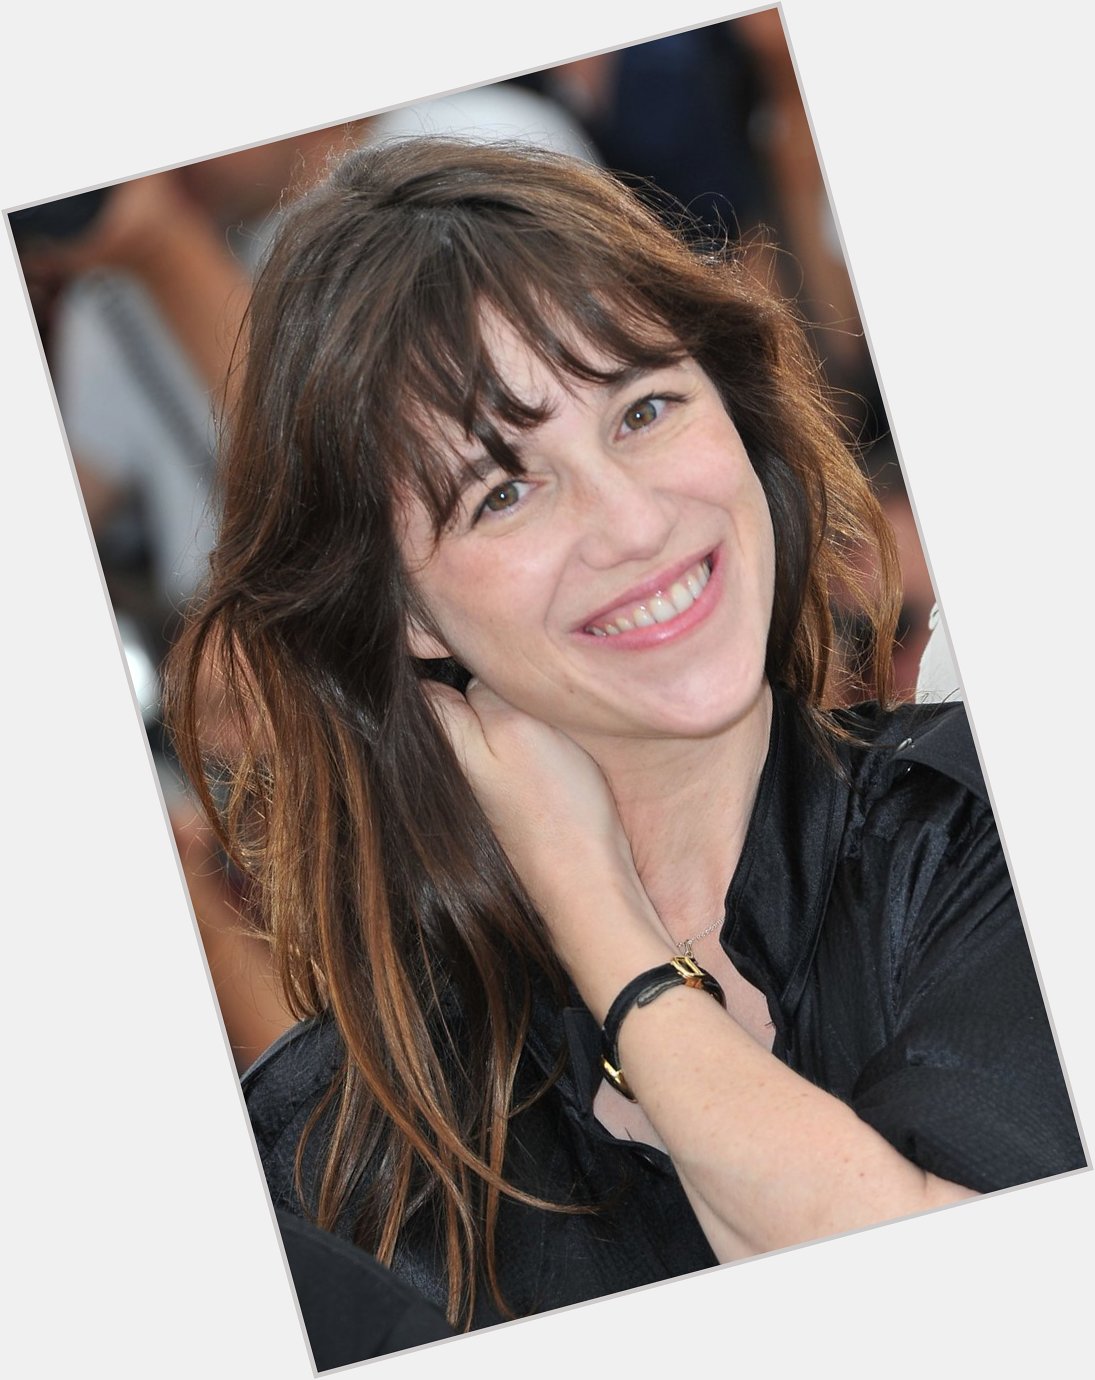 Happy Birthday to Charlotte Gainsbourg who turns 49 today! 